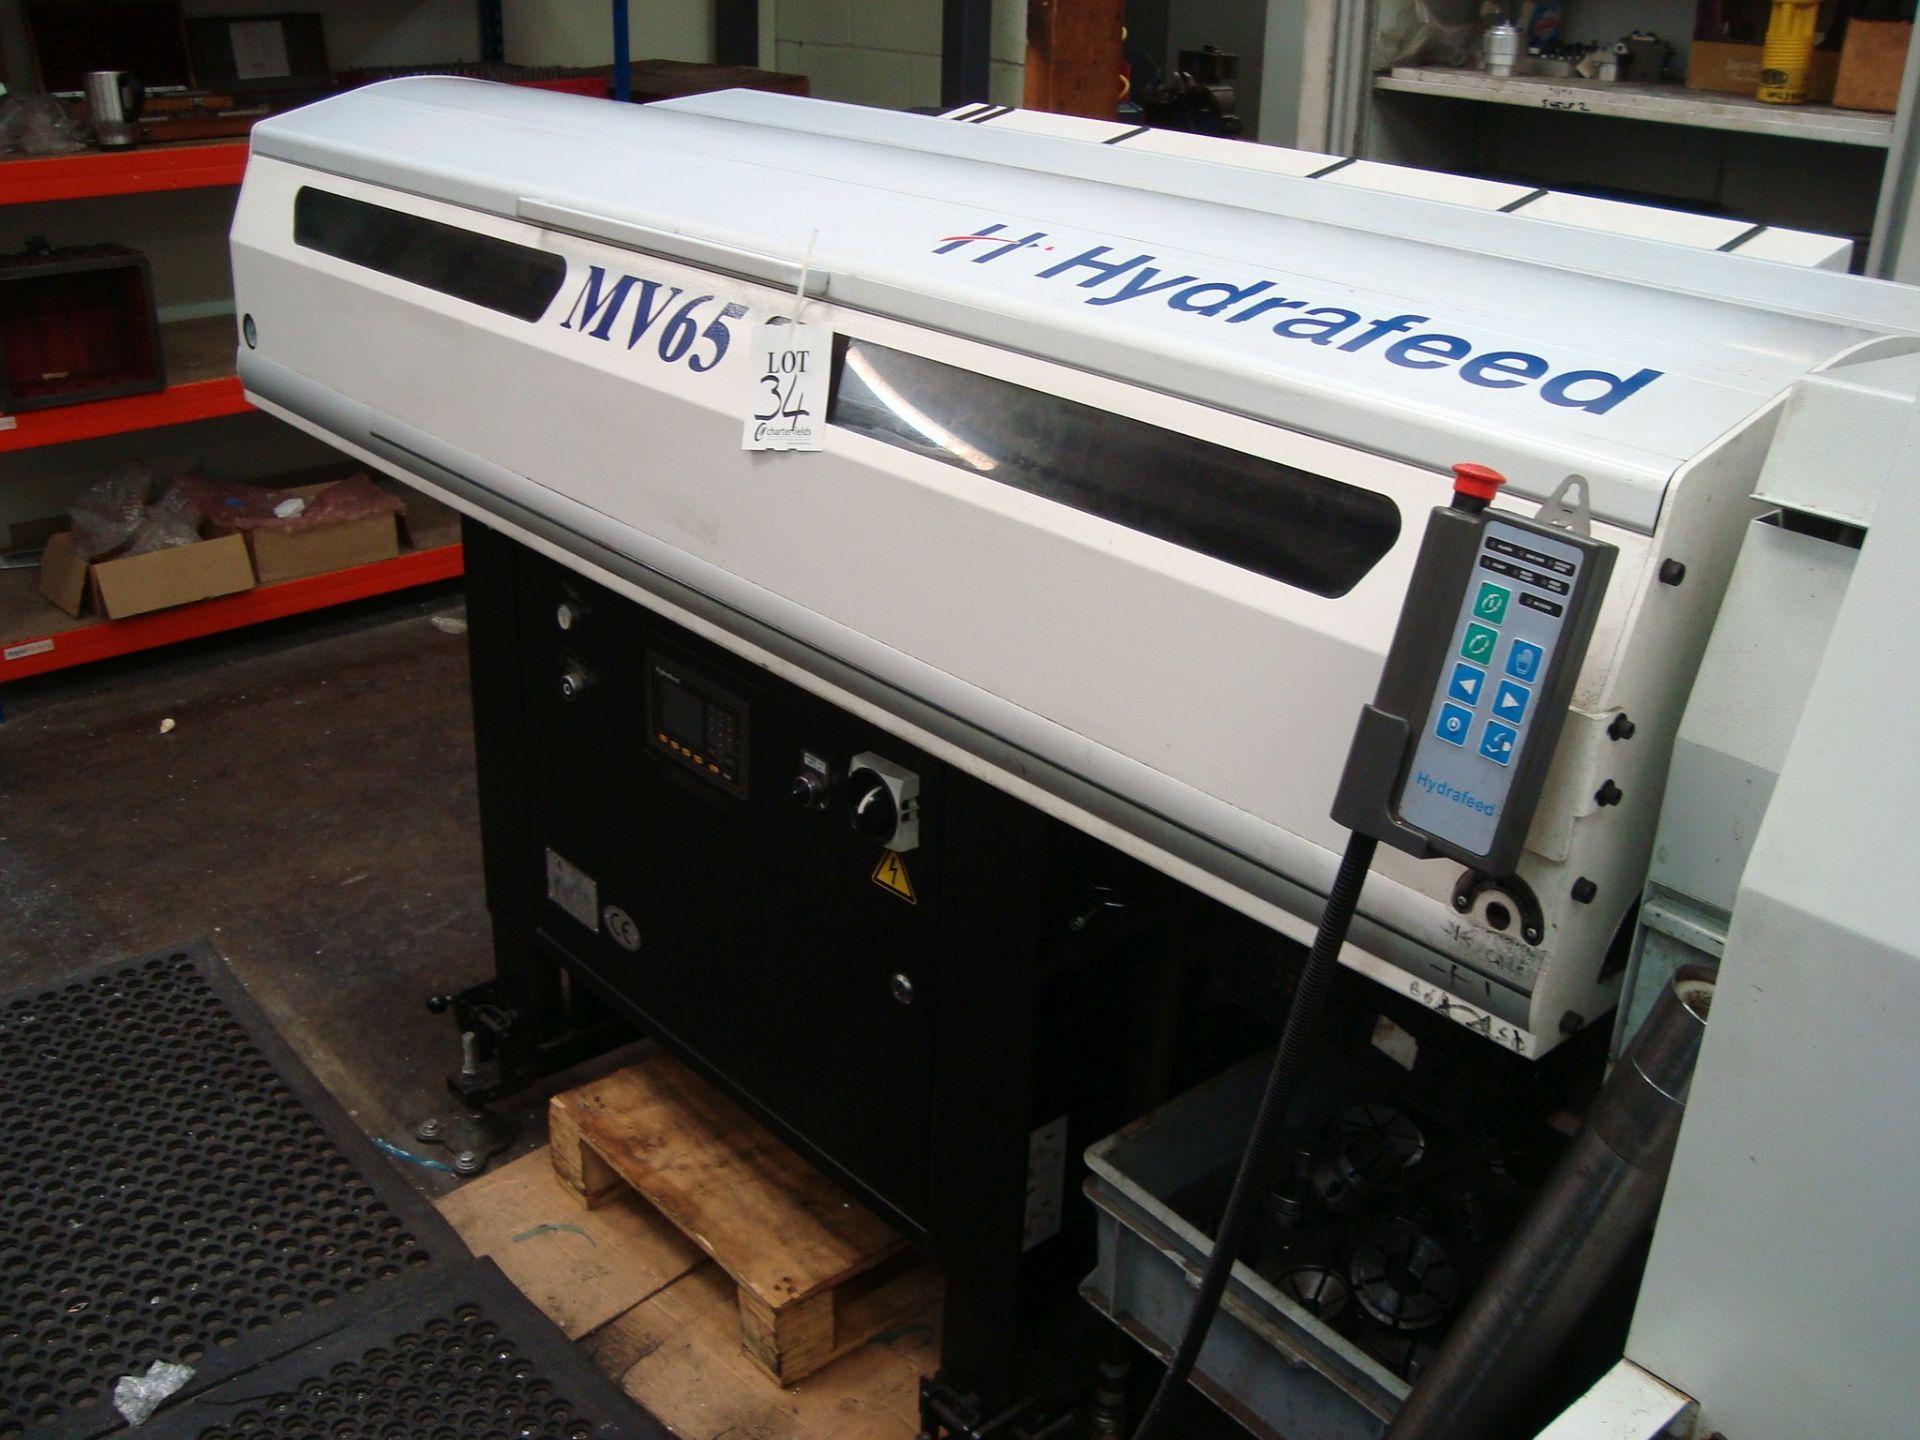 Hydrafeed MV65 Multifeed CNC magazine bar feed unit Serial number 16140836. Collection strictly by